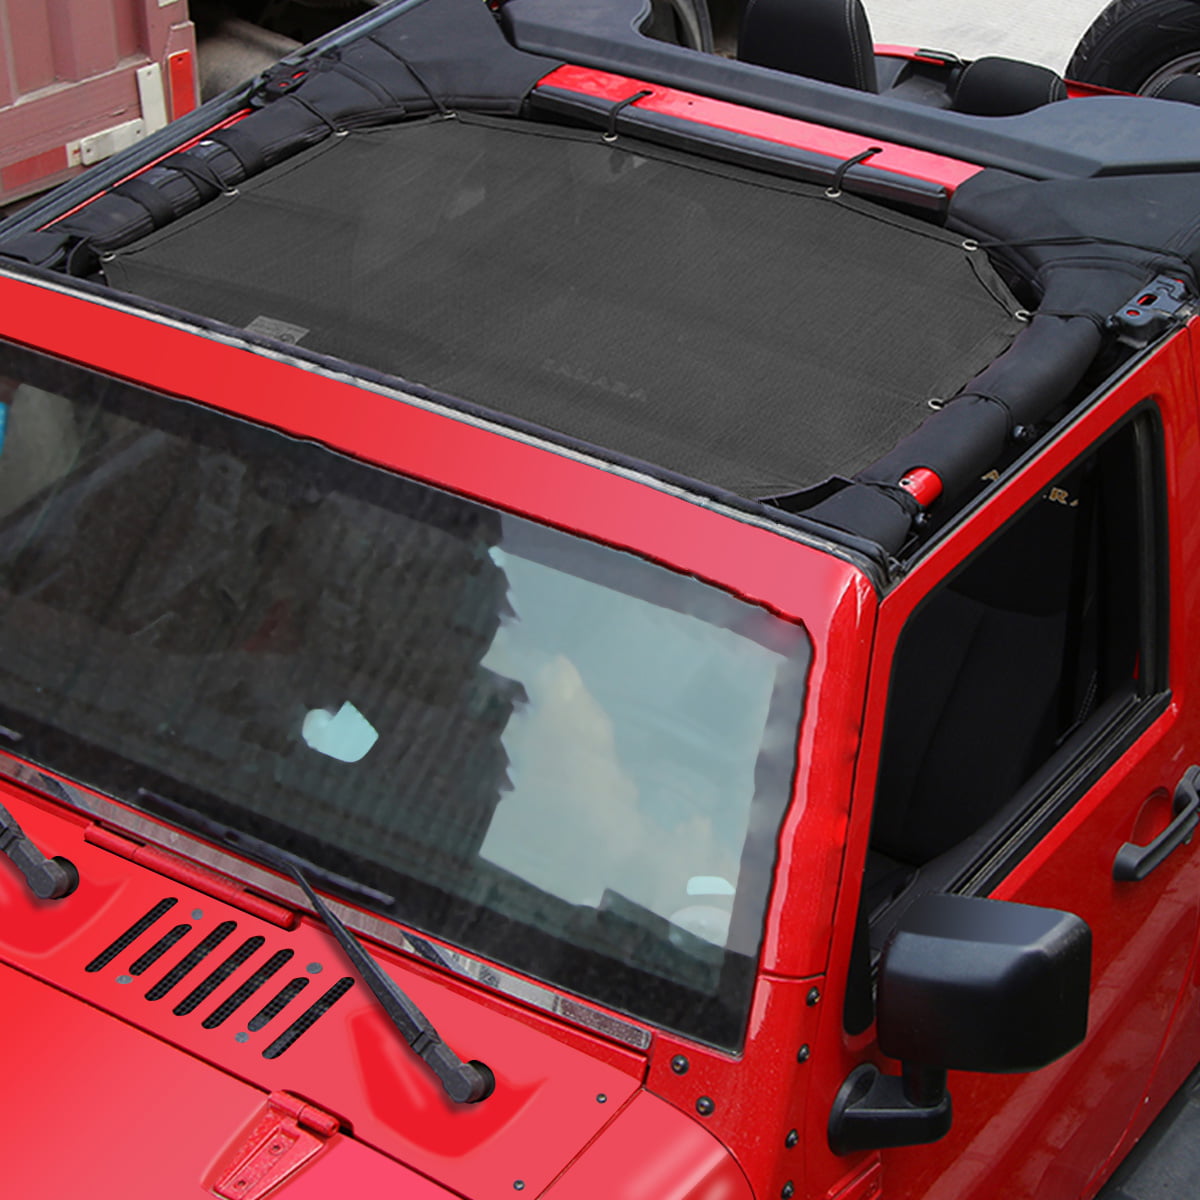 Front Face bestaoo Polyester Top Cover Provides UV Sun Protection for JL Wrangler 2018 Jeep Wrangler Sunshade Mesh Top Cover for JL 4-Door 